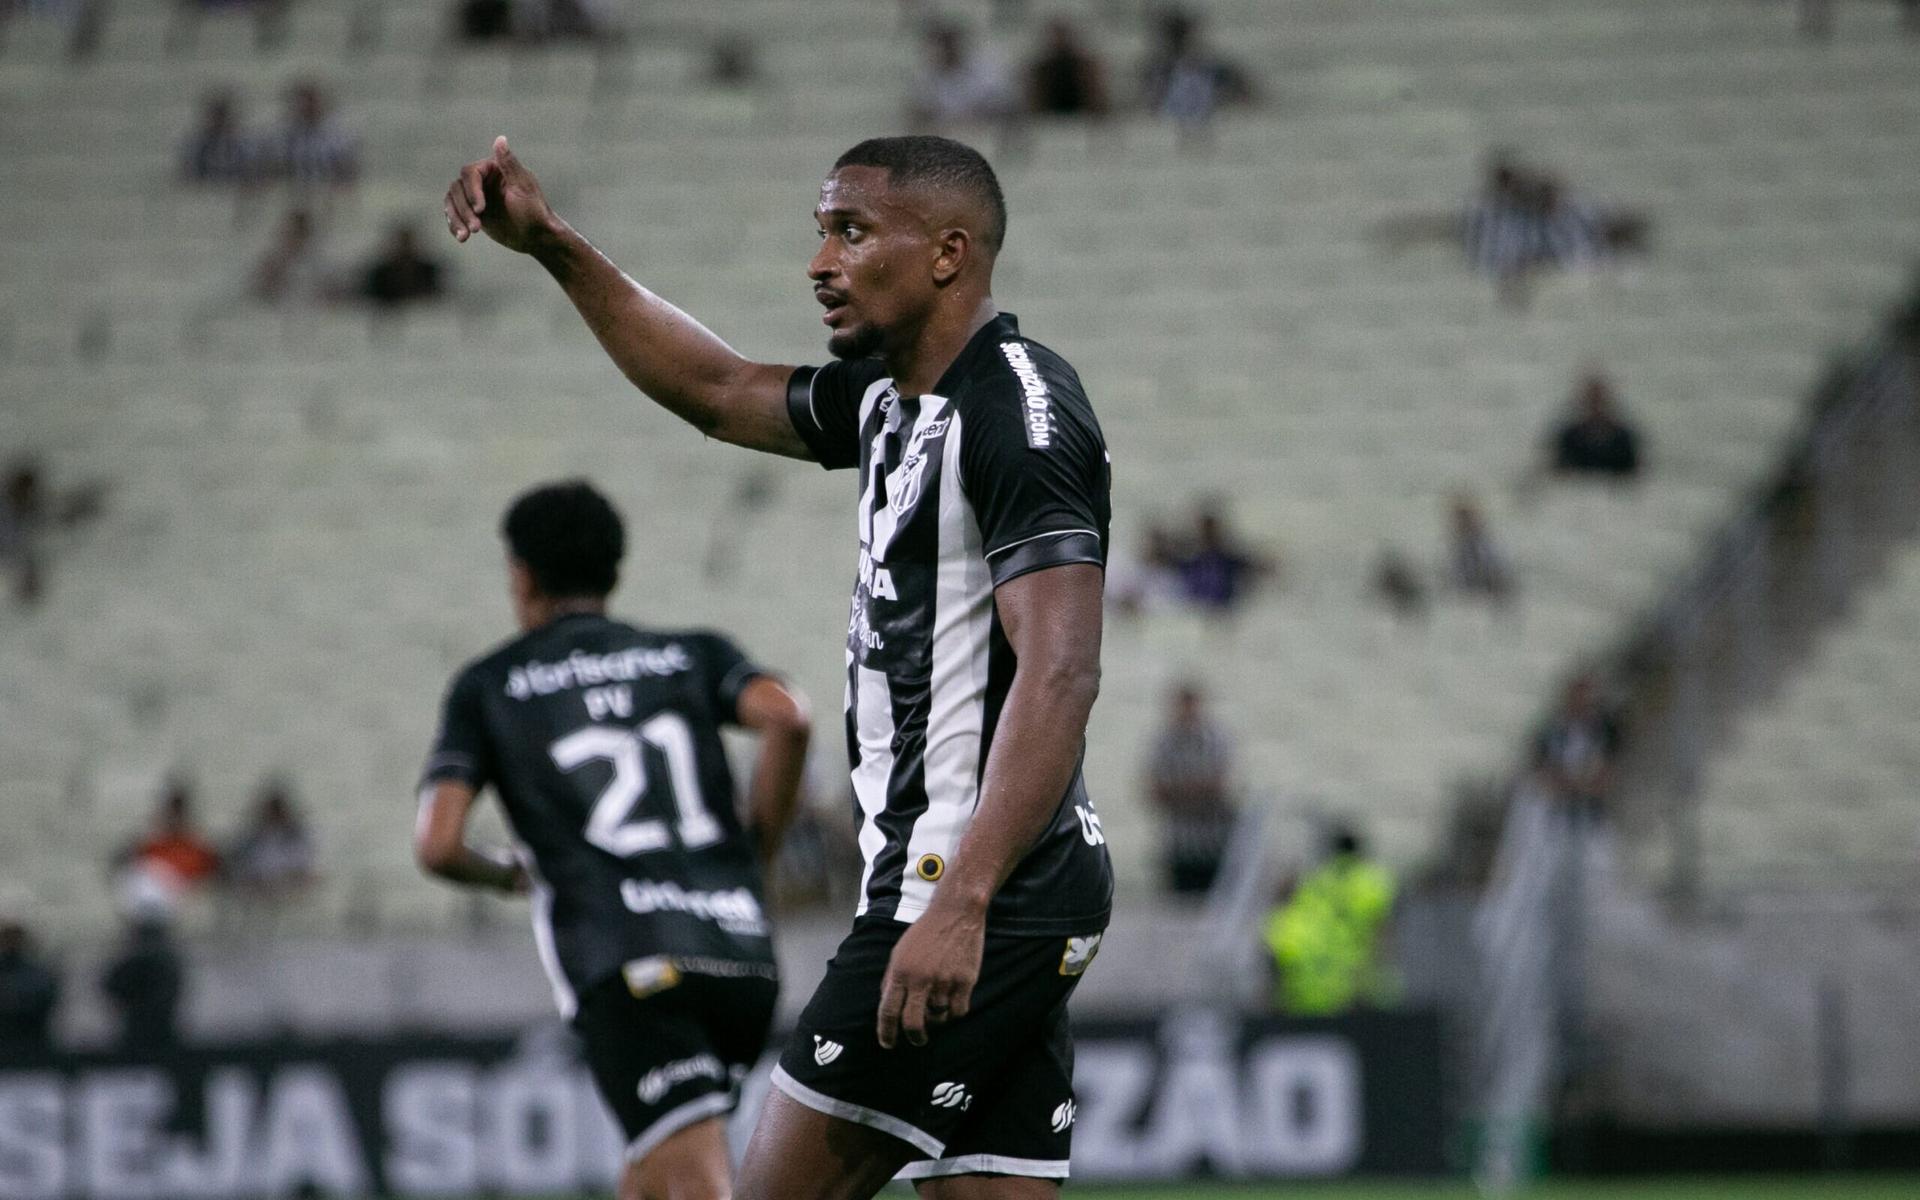 odds, statistics and betting info on the Copa do Brasil